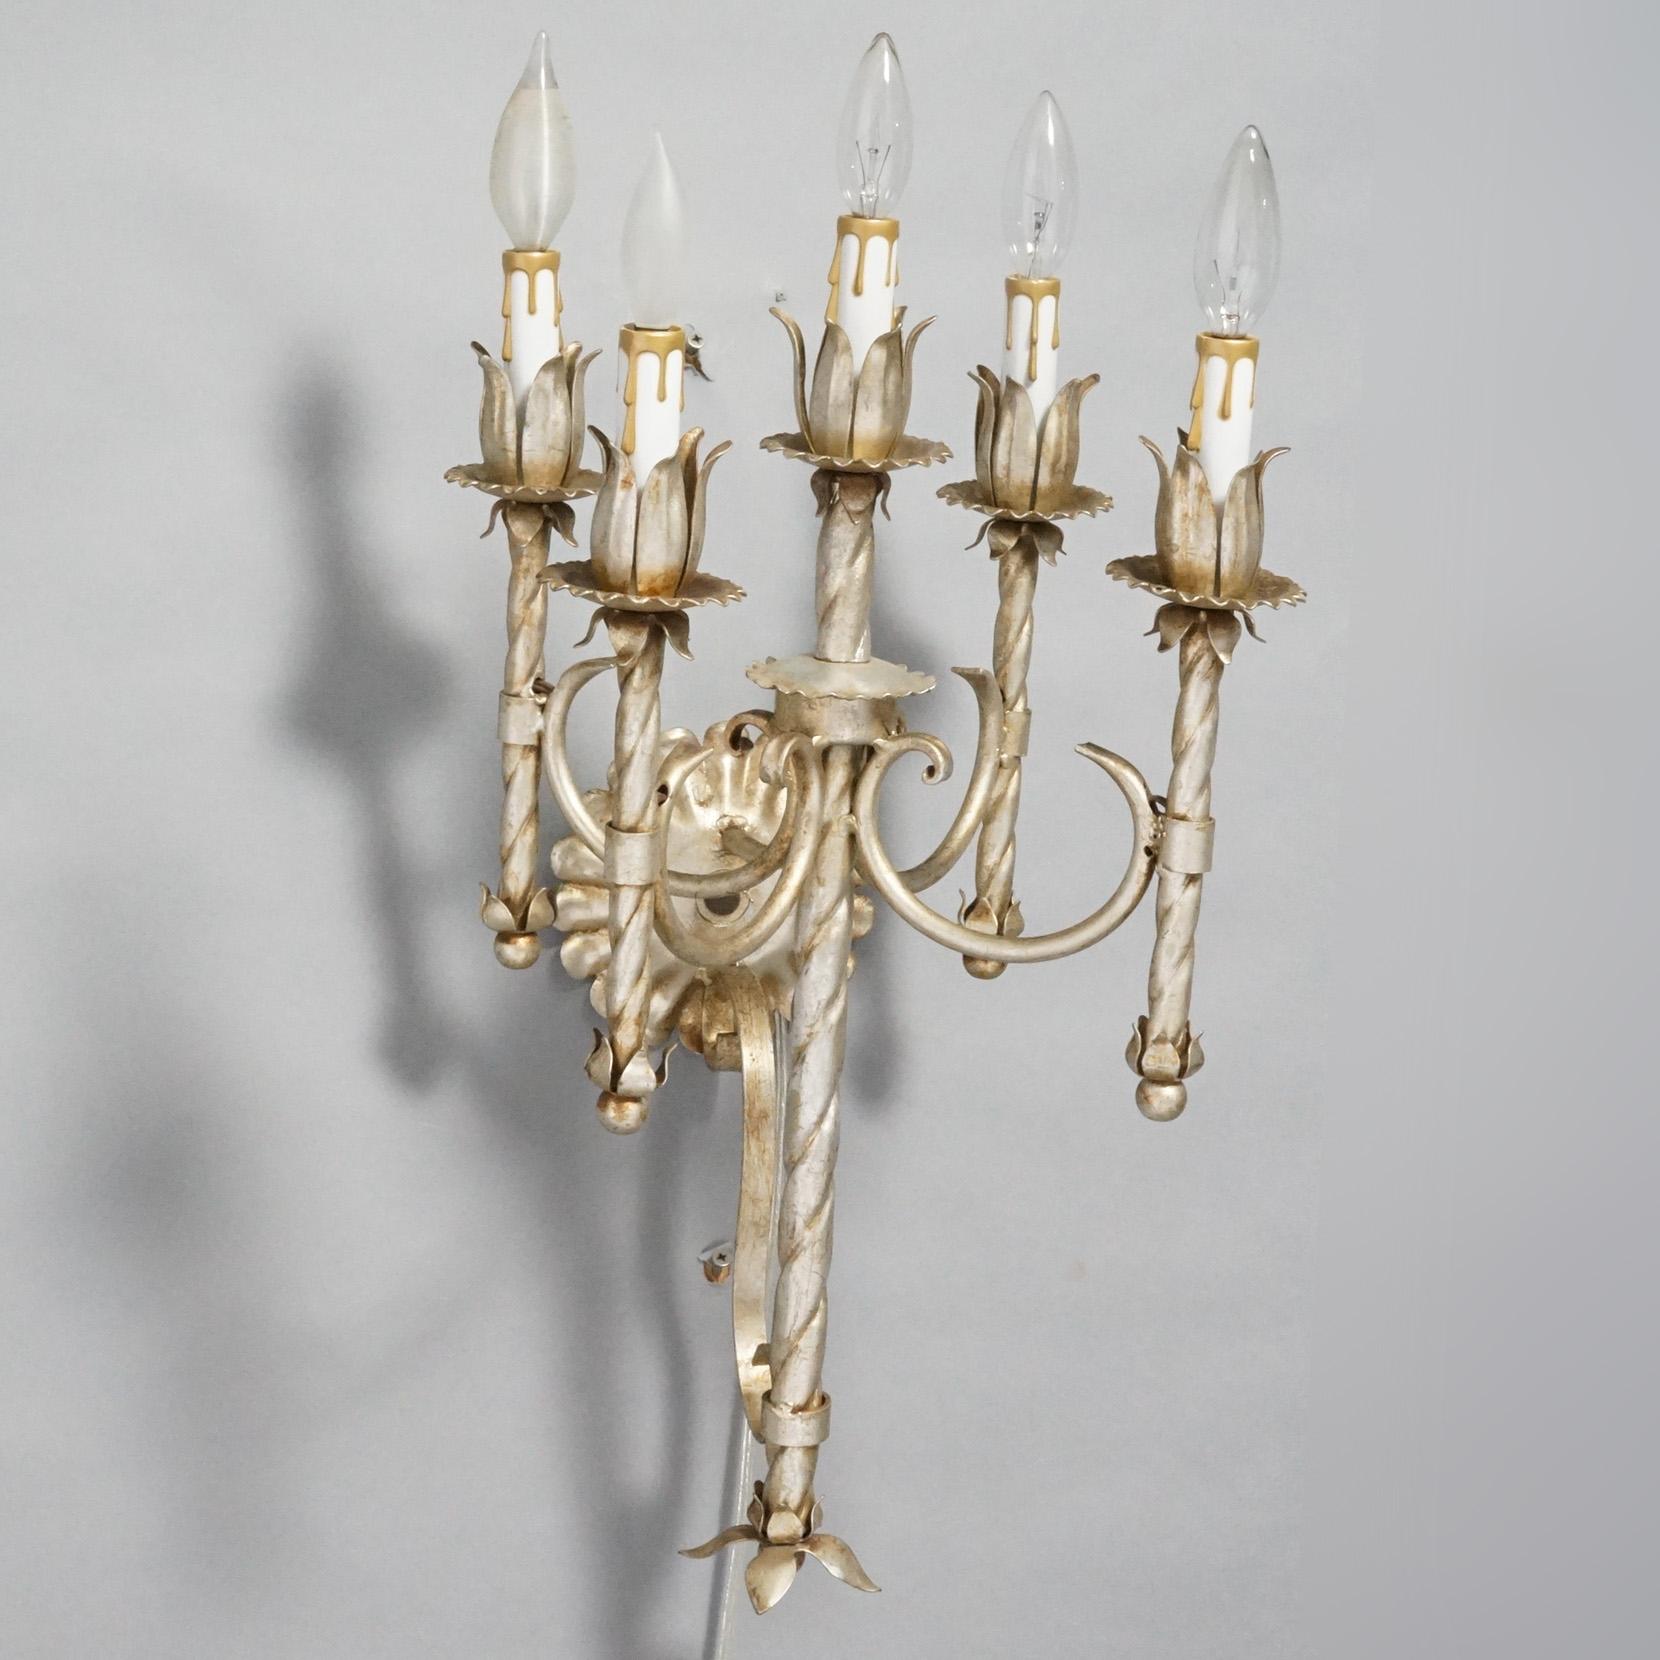 Antique Arts & Crafts Gothic Silvered Finish Candelabra Wall Sconces 20th C. For Sale 2